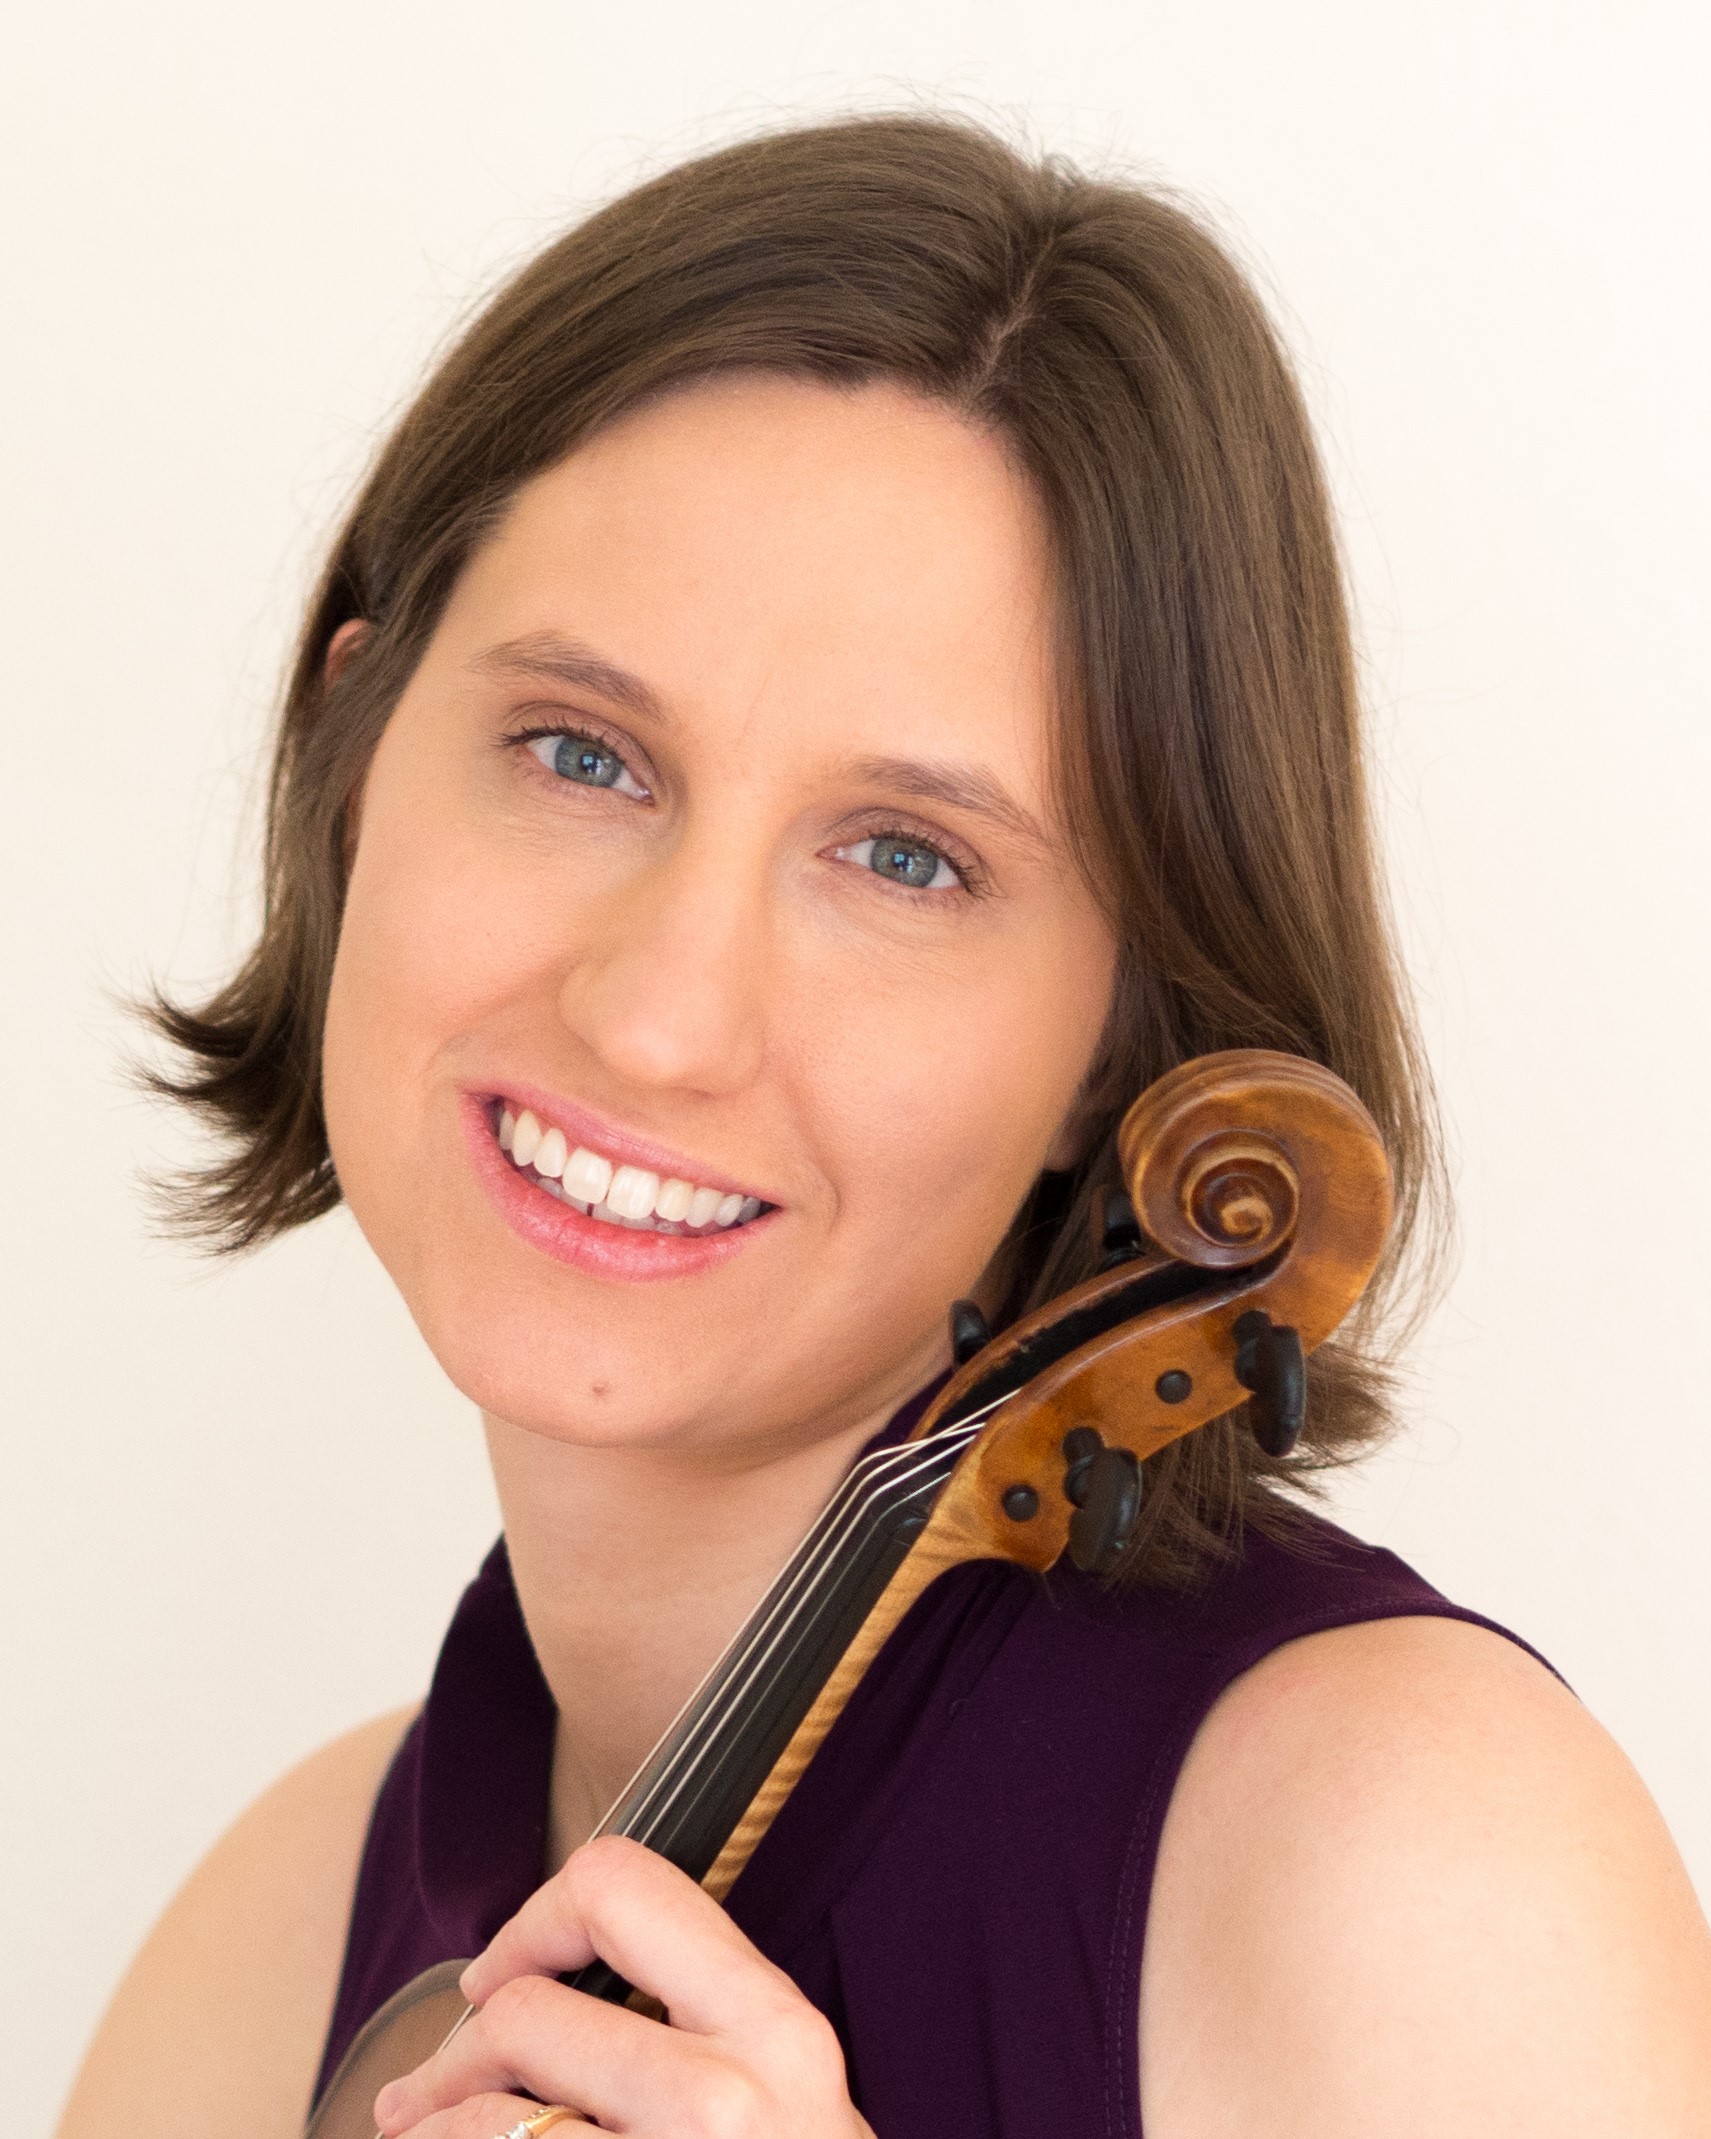 Faculty member Heather Ray against a white background holding a violin